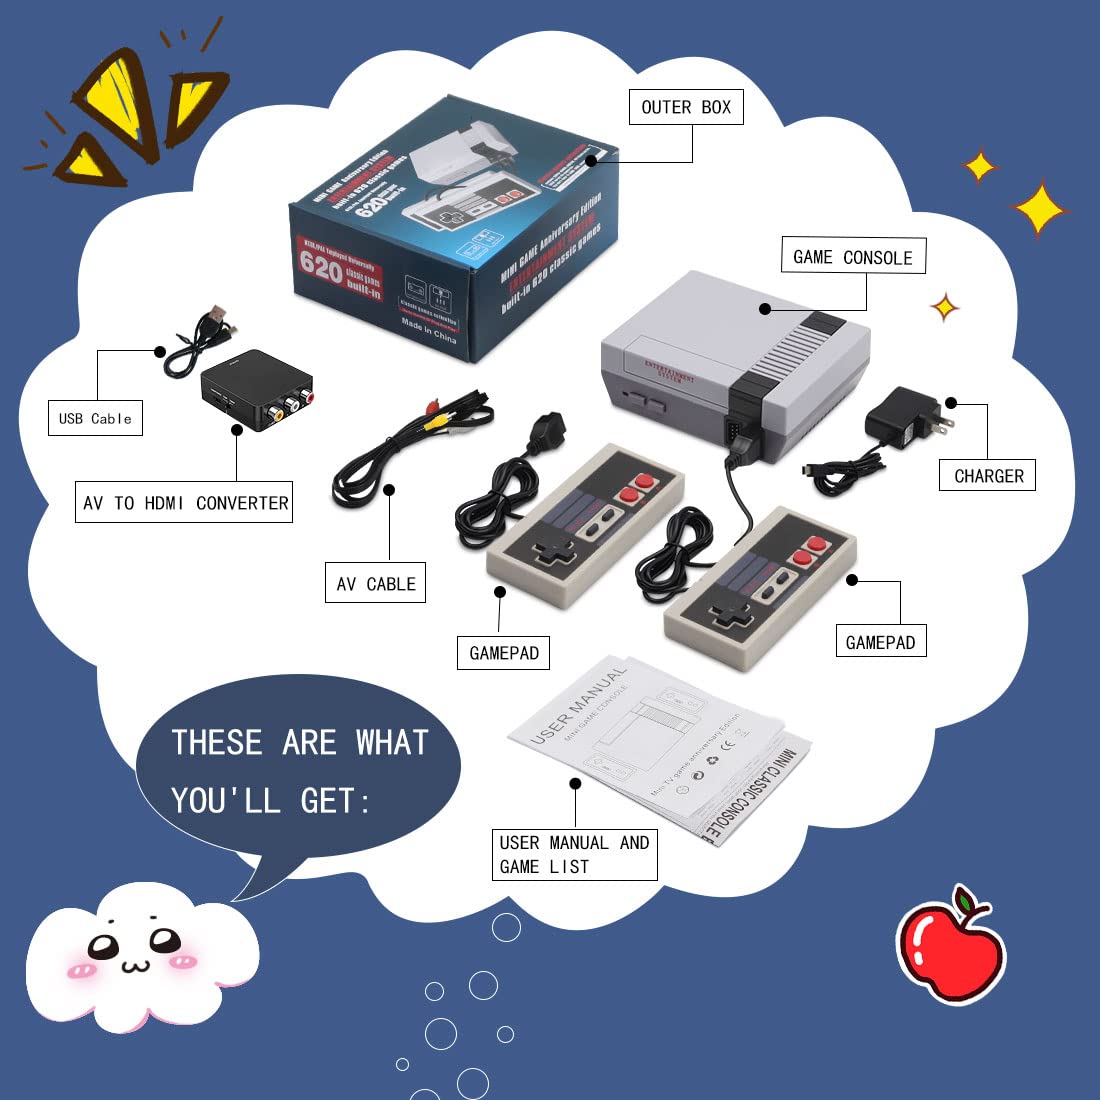 Retro Video Game Console Preloaded Mini Game Anniversary Edition 620 Classic Games, AV/HDMI Converter, Old School Entertainment System, Mini Classic Game System, Gifts for Kids